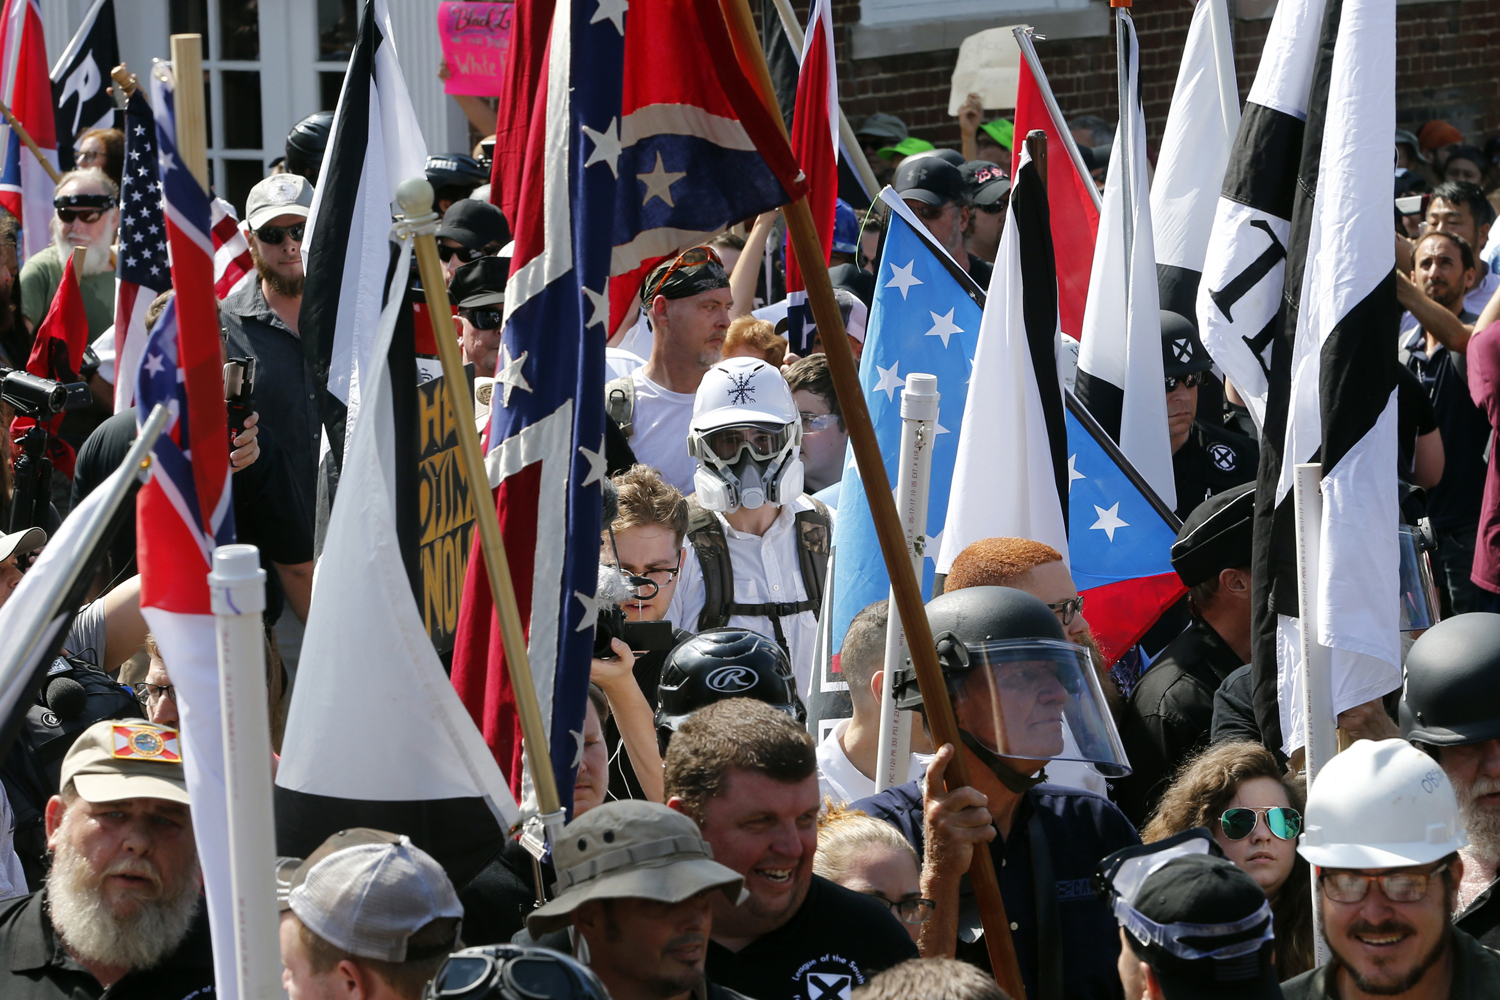 White nationalist demonstrators walk into the entrance of Lee Park surrounded by counter demonstrators in Charlottesville, Va., Saturday, Aug. 12, 2017. (Steve Helber/AP)